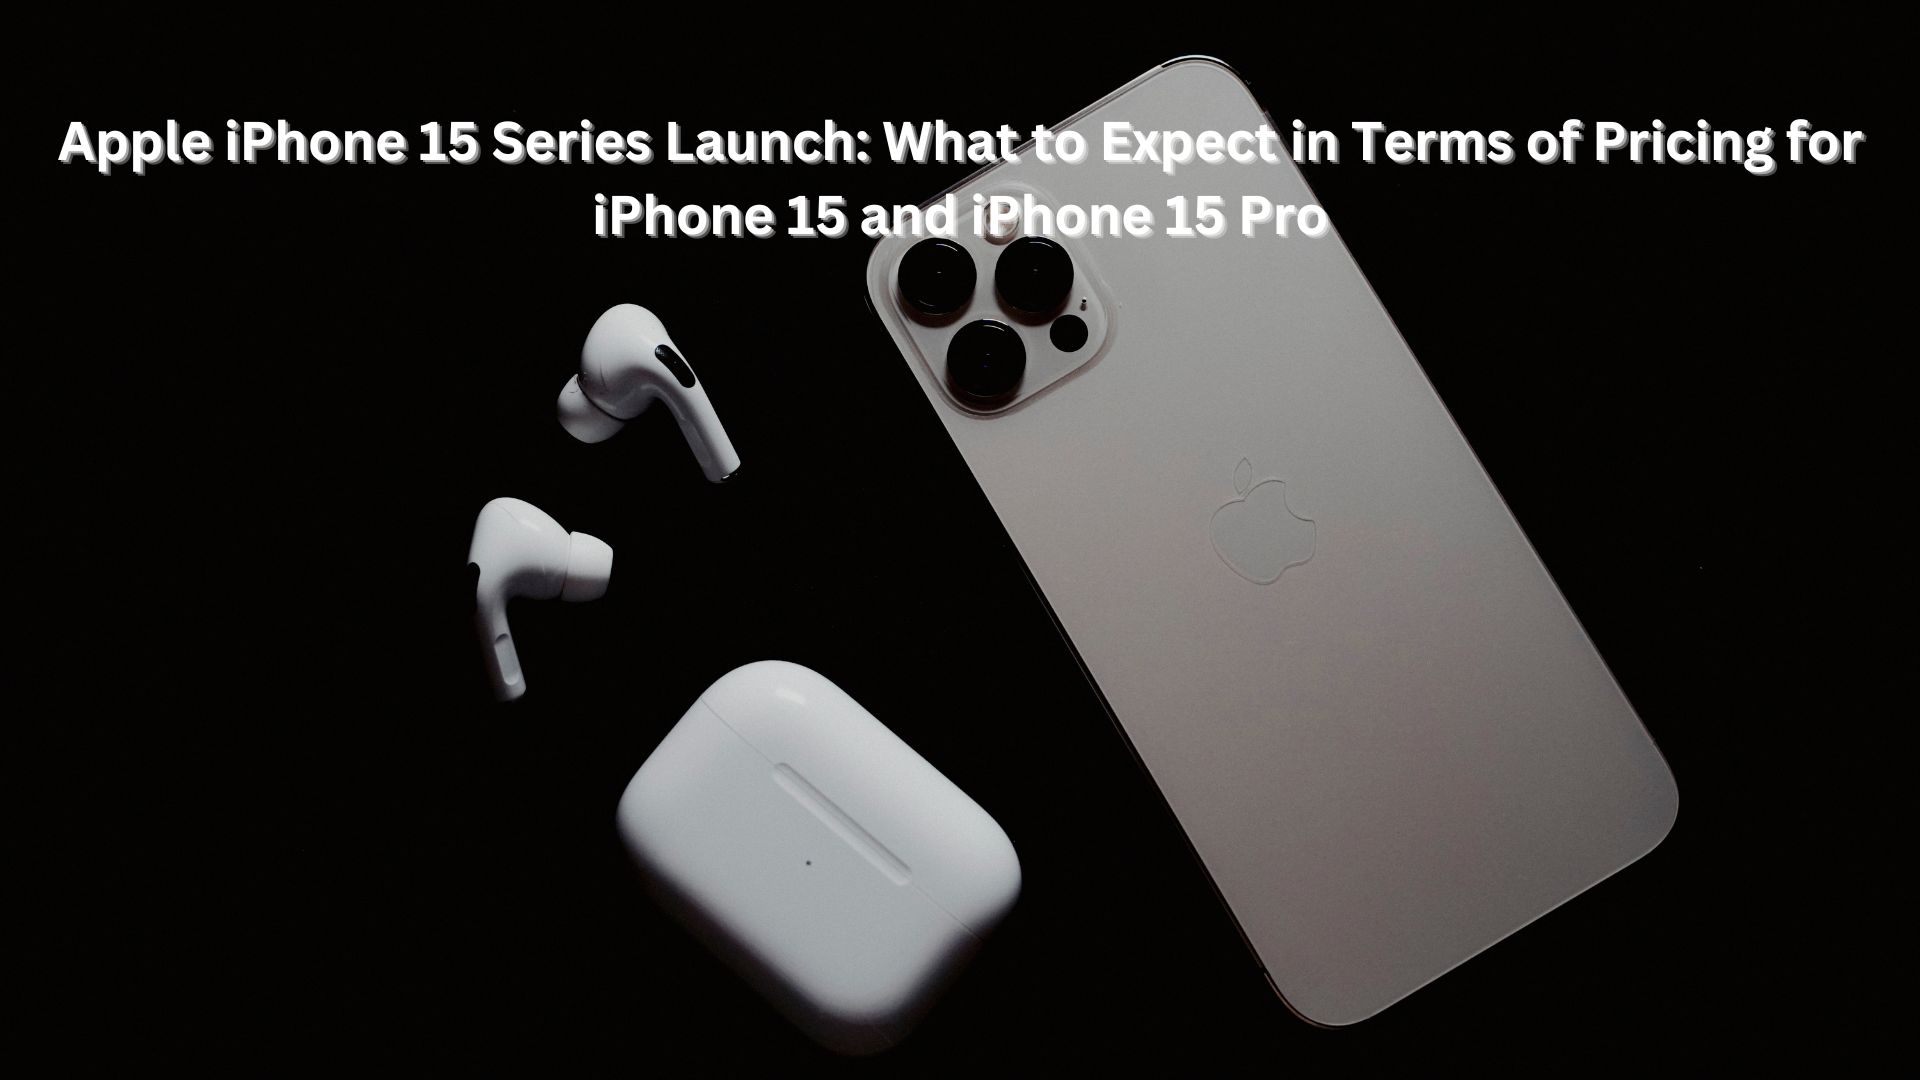 Apple iPhone 15 Series Launch: What to Expect in Terms of Pricing for iPhone 15 and iPhone 15 Pro